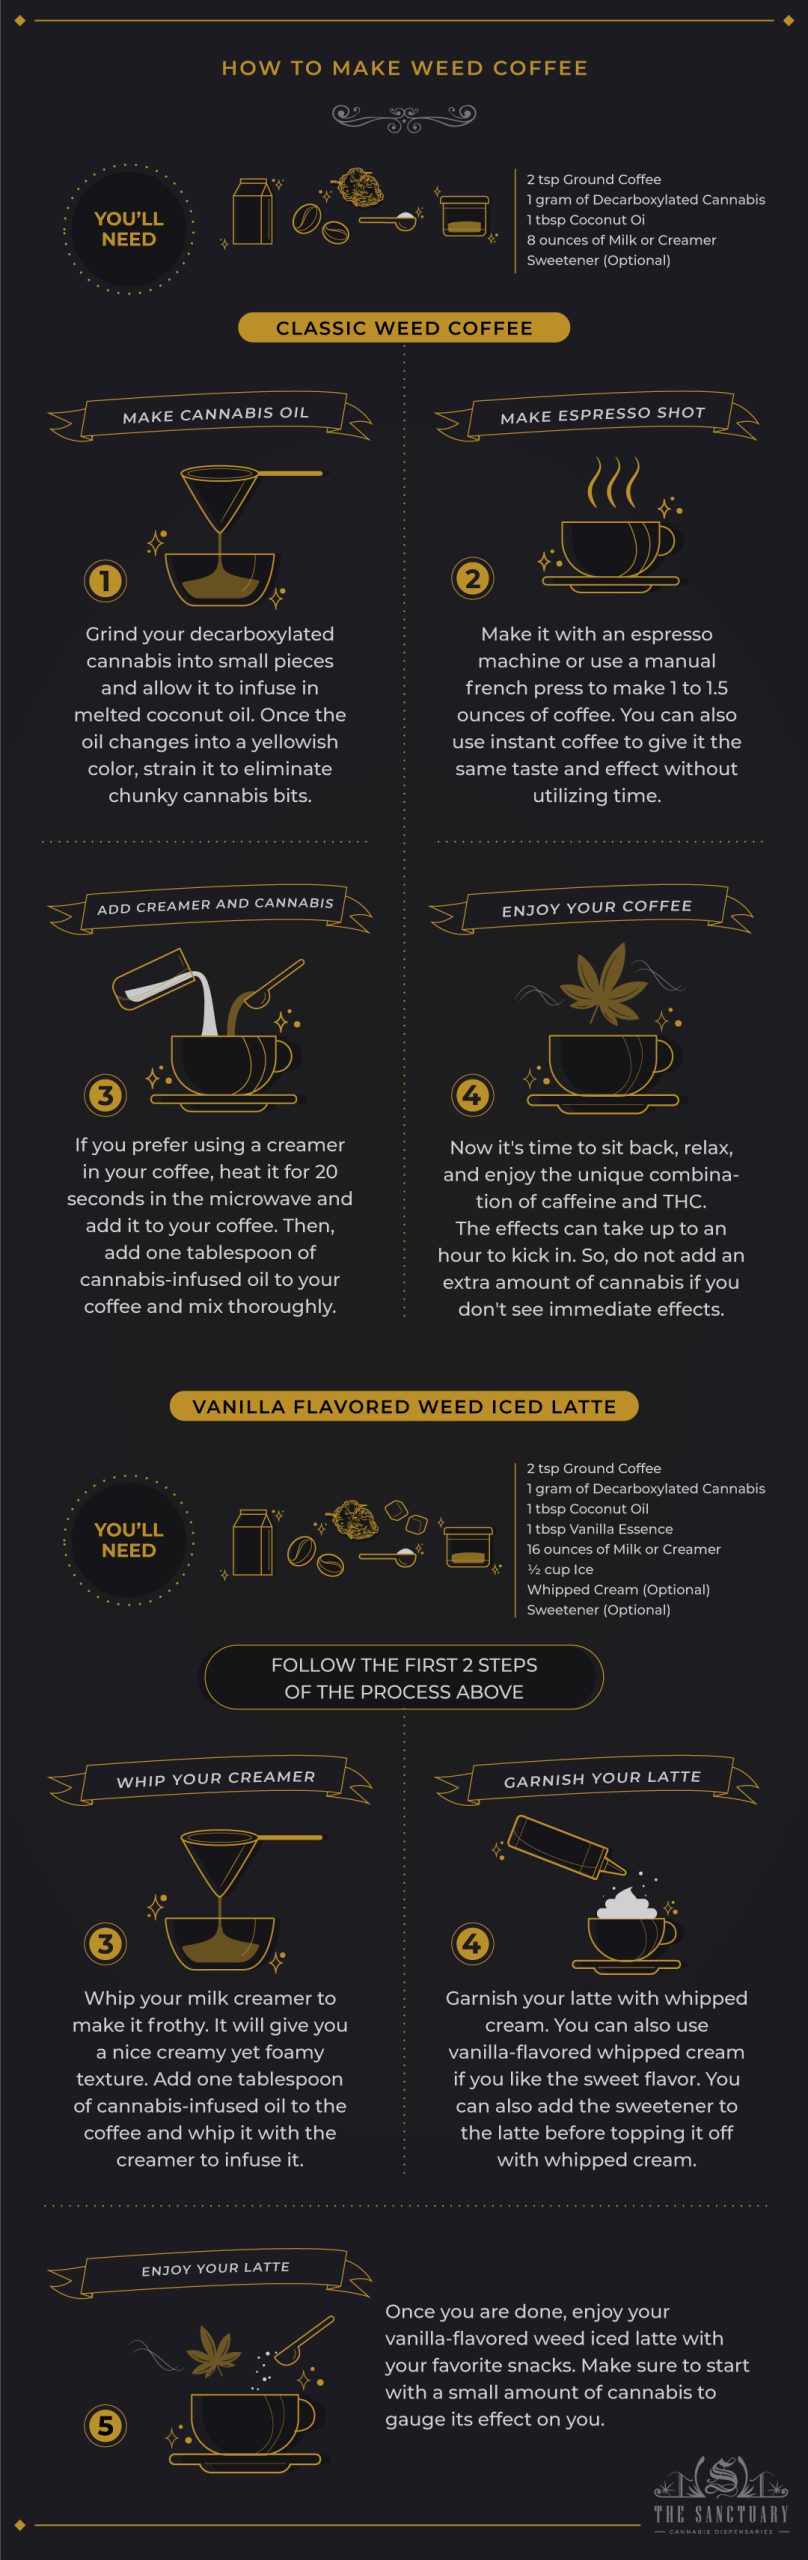 How to Make Weed Coffee 